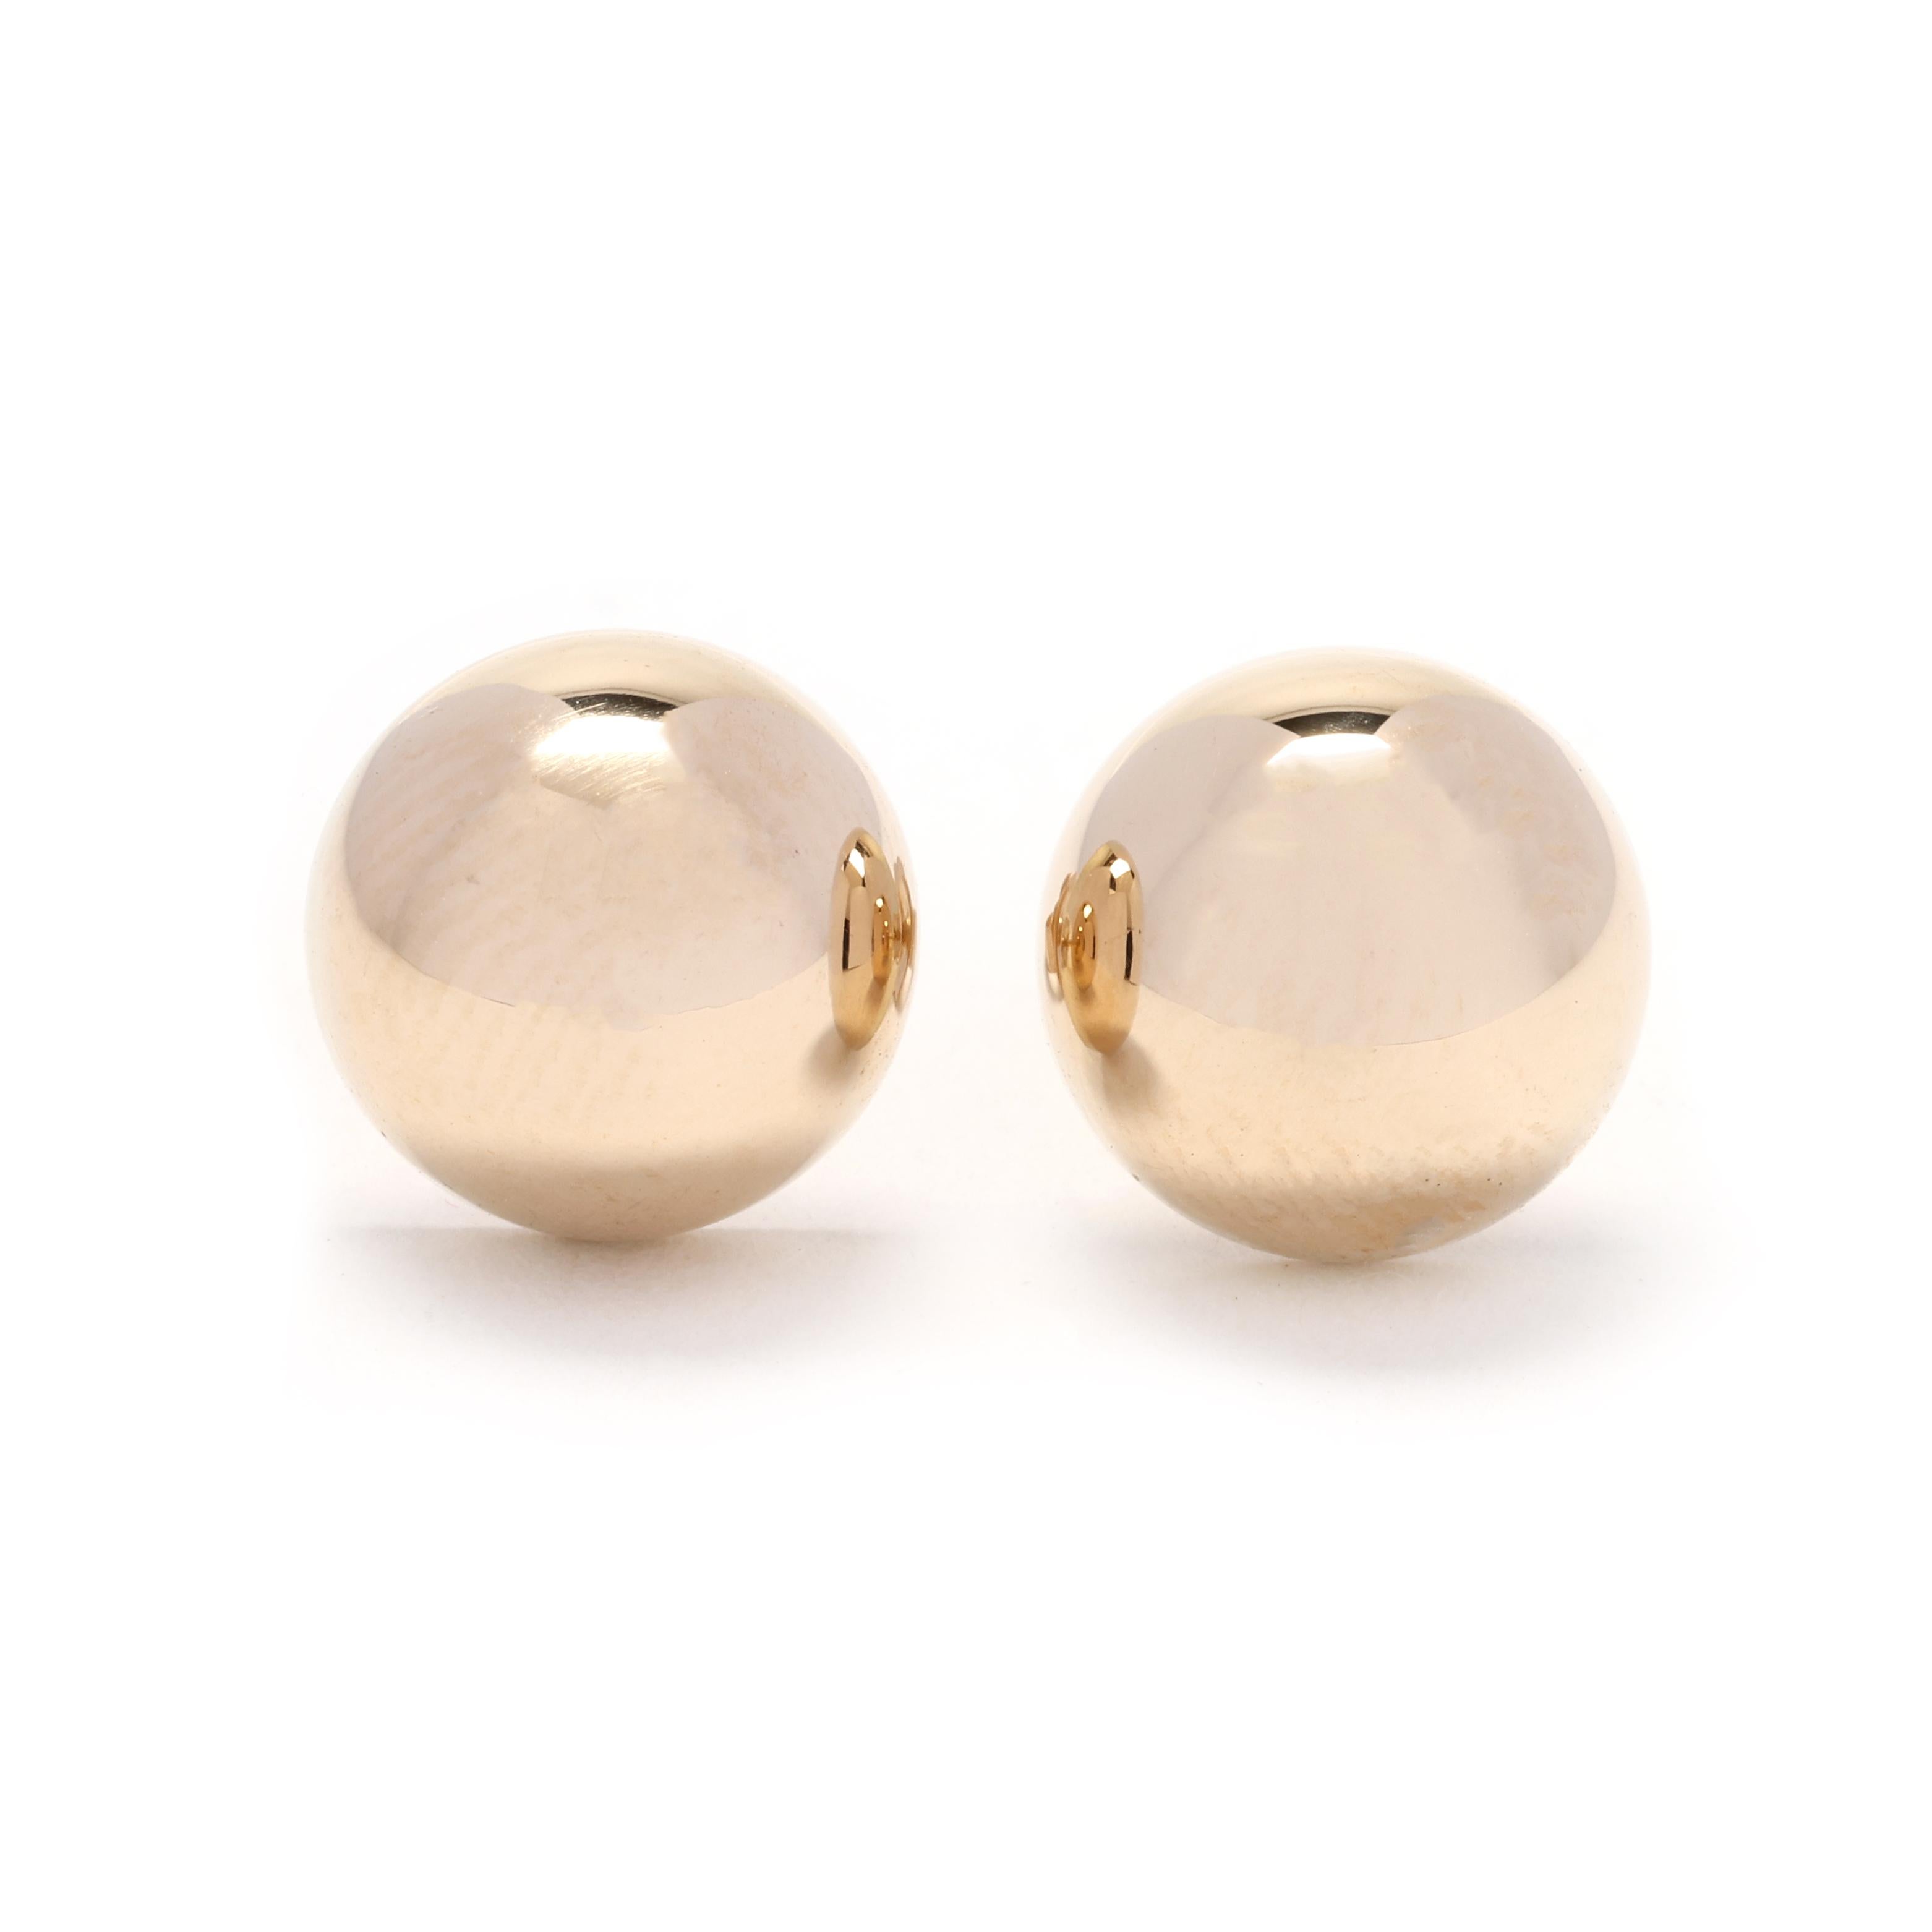 Women's or Men's 14k Yellow Gold Dome Studs, Round Dome Earrings, Dainty Studs For Sale